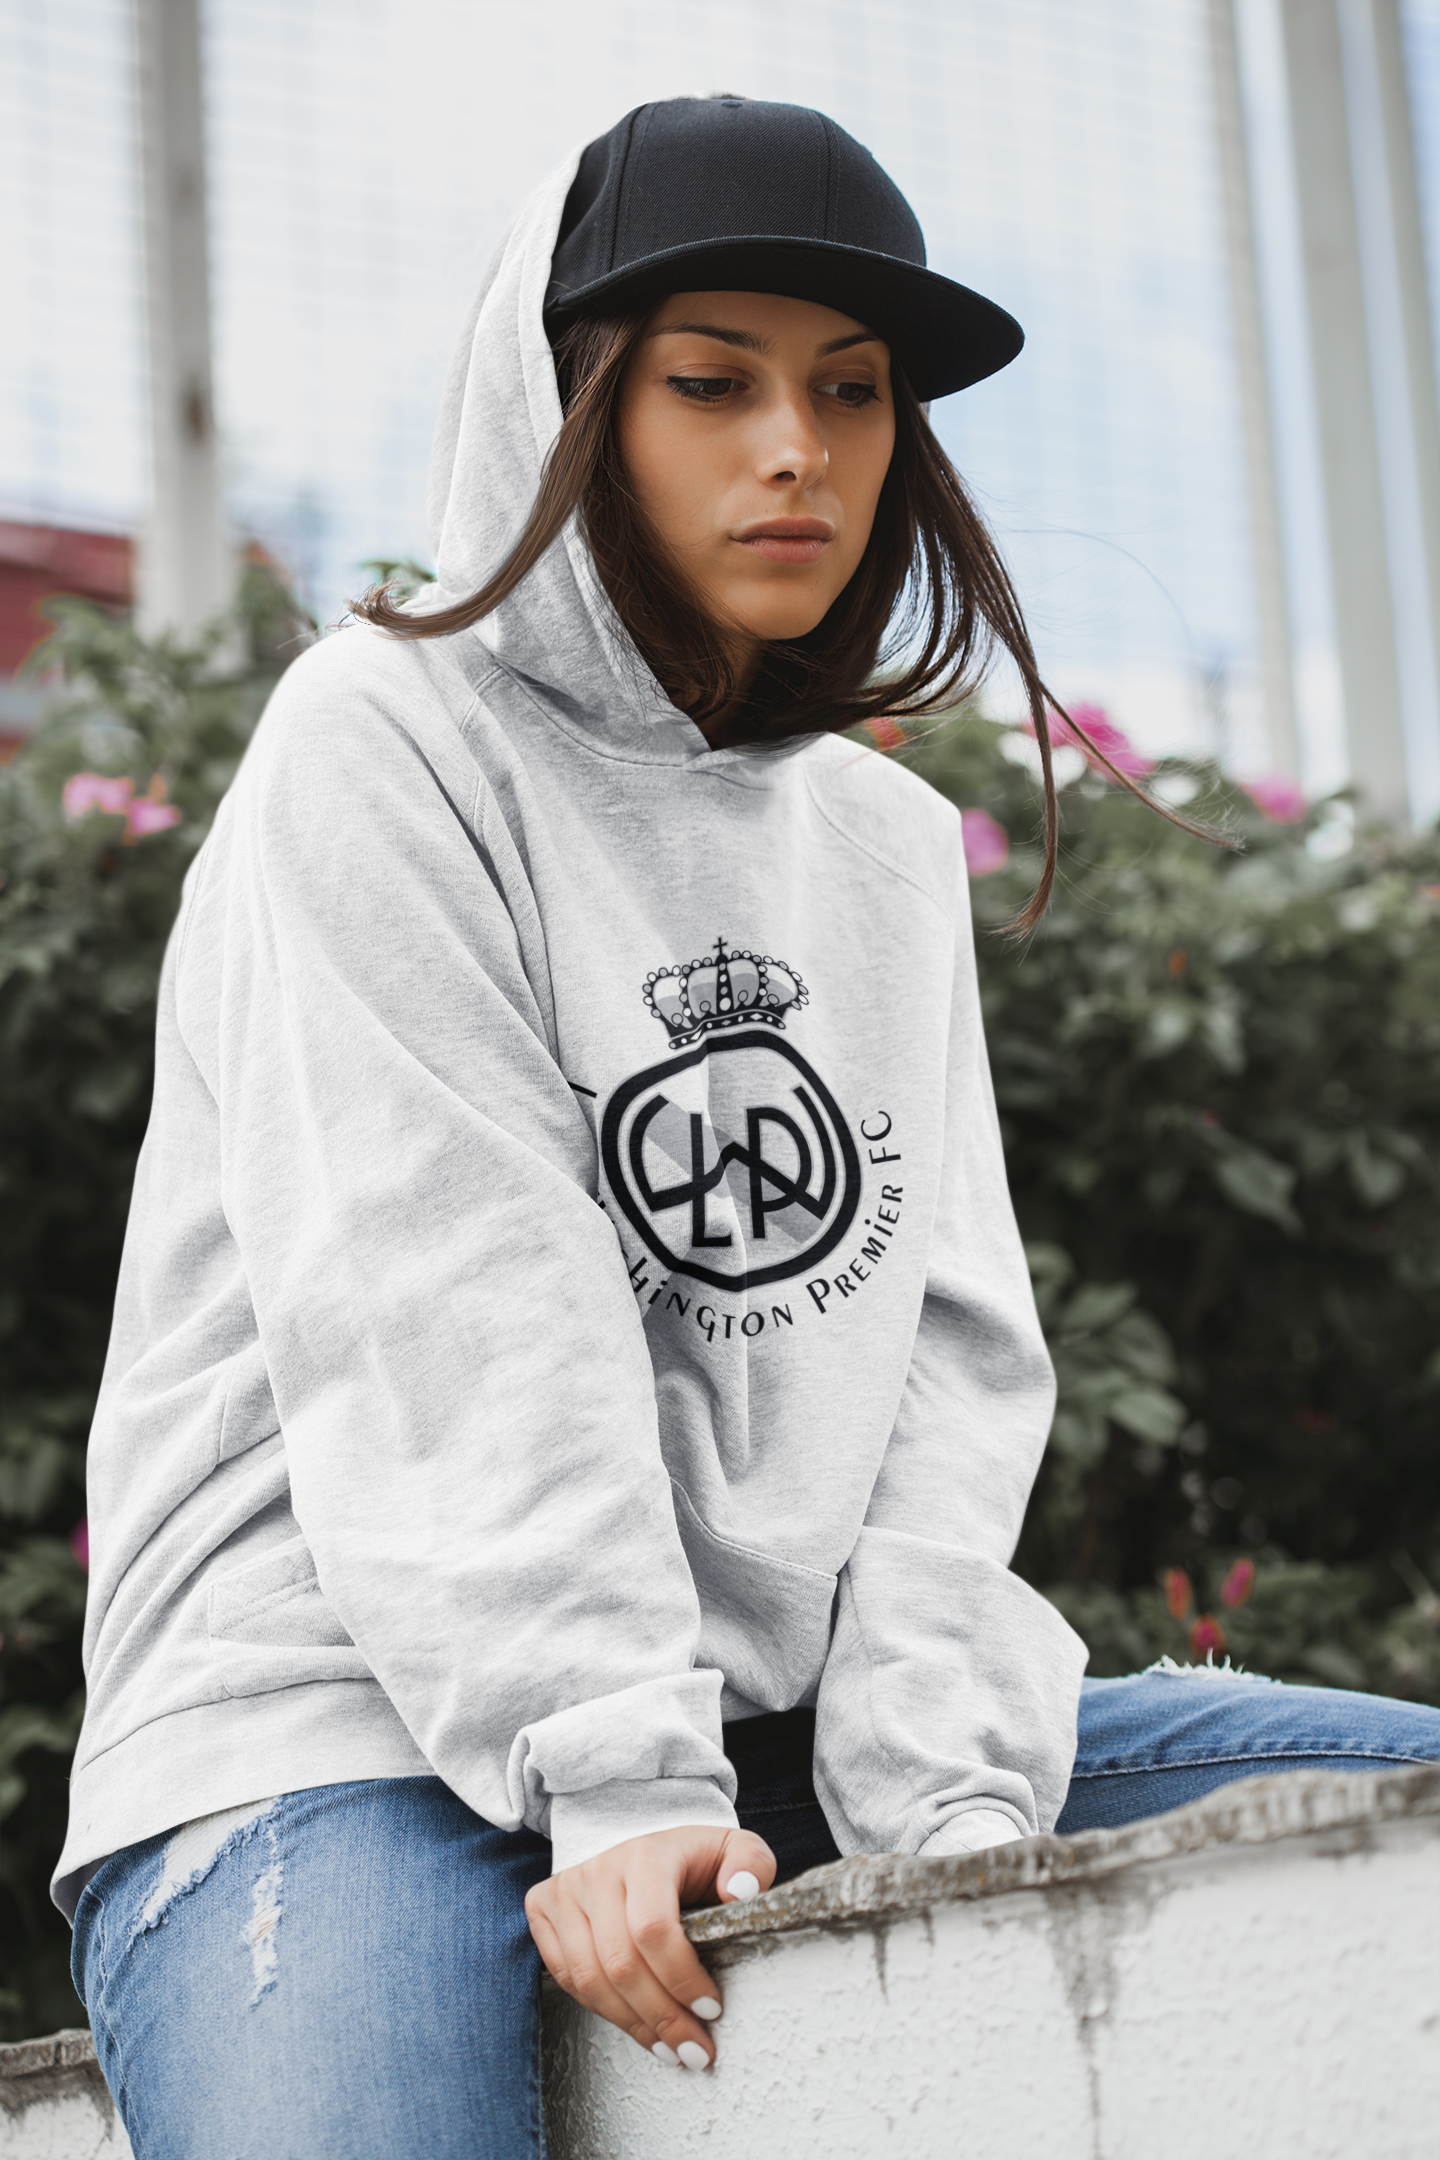 A young women sitting on a wall wearing a Lake Washington Premier FC light gray hoodie with the club crest in black and white on the chest. She is wearing a black cap with the hood up over her head and covering the cap